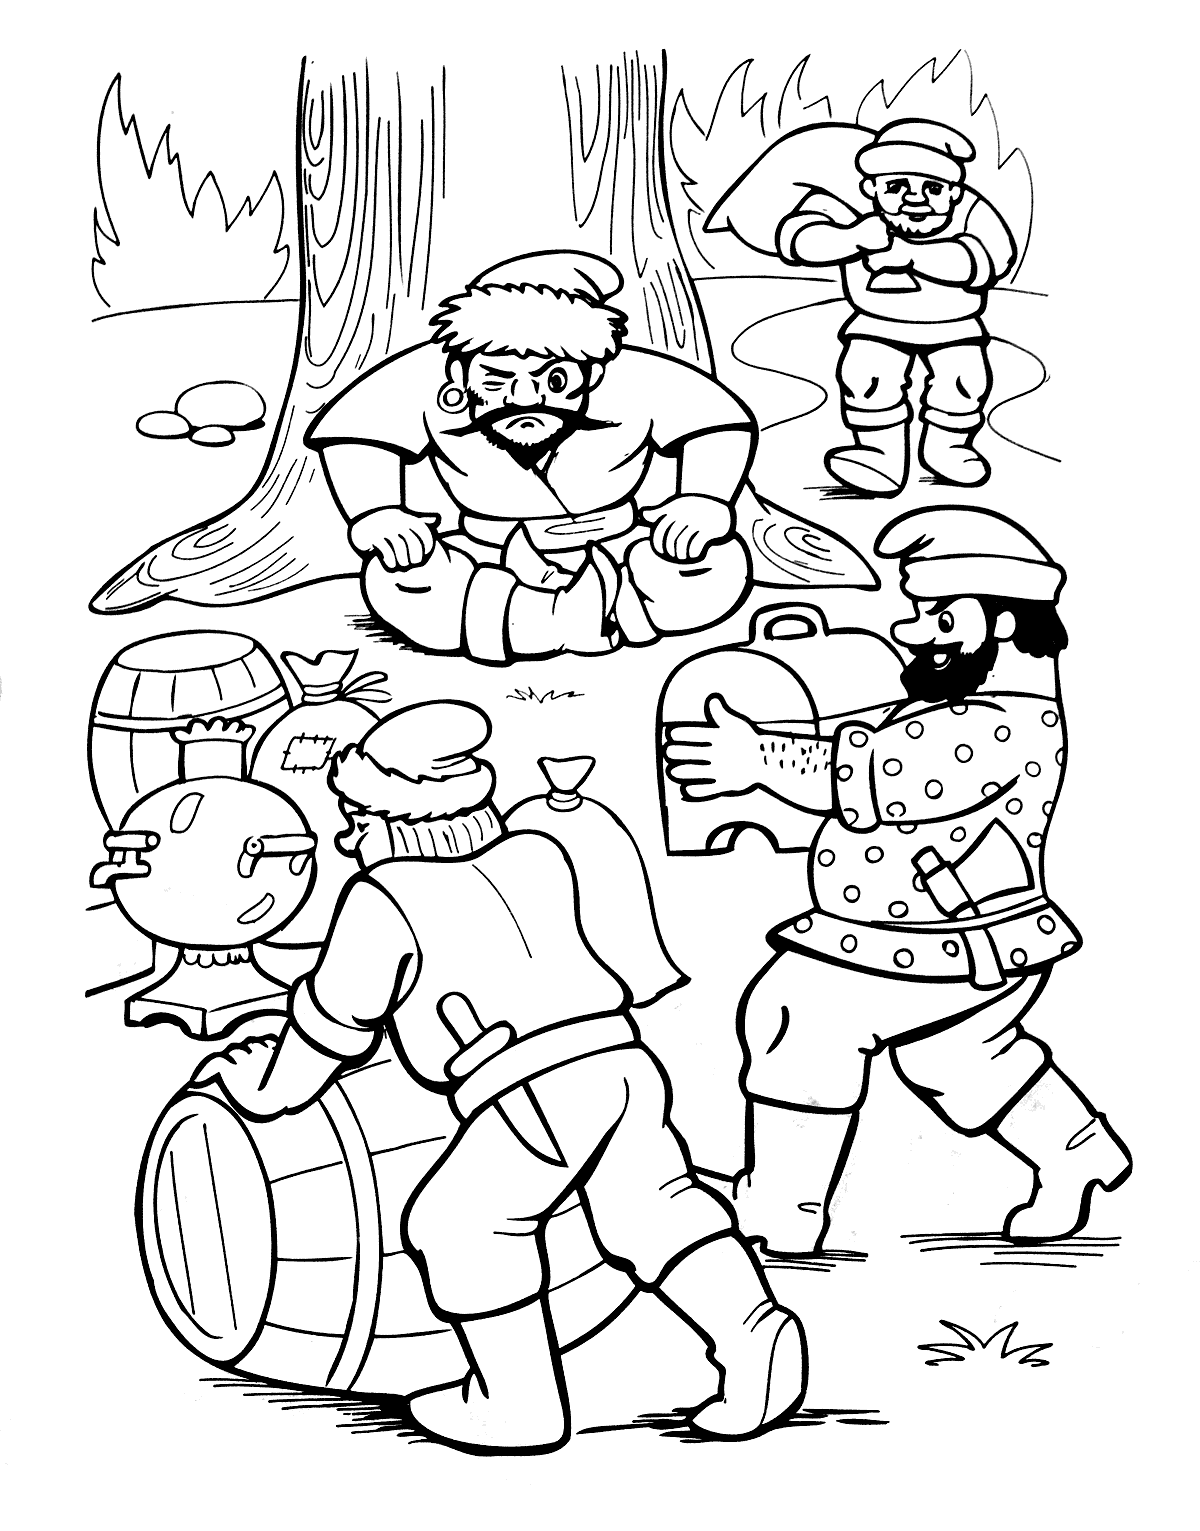 Bandit coloring pages to download and print for free